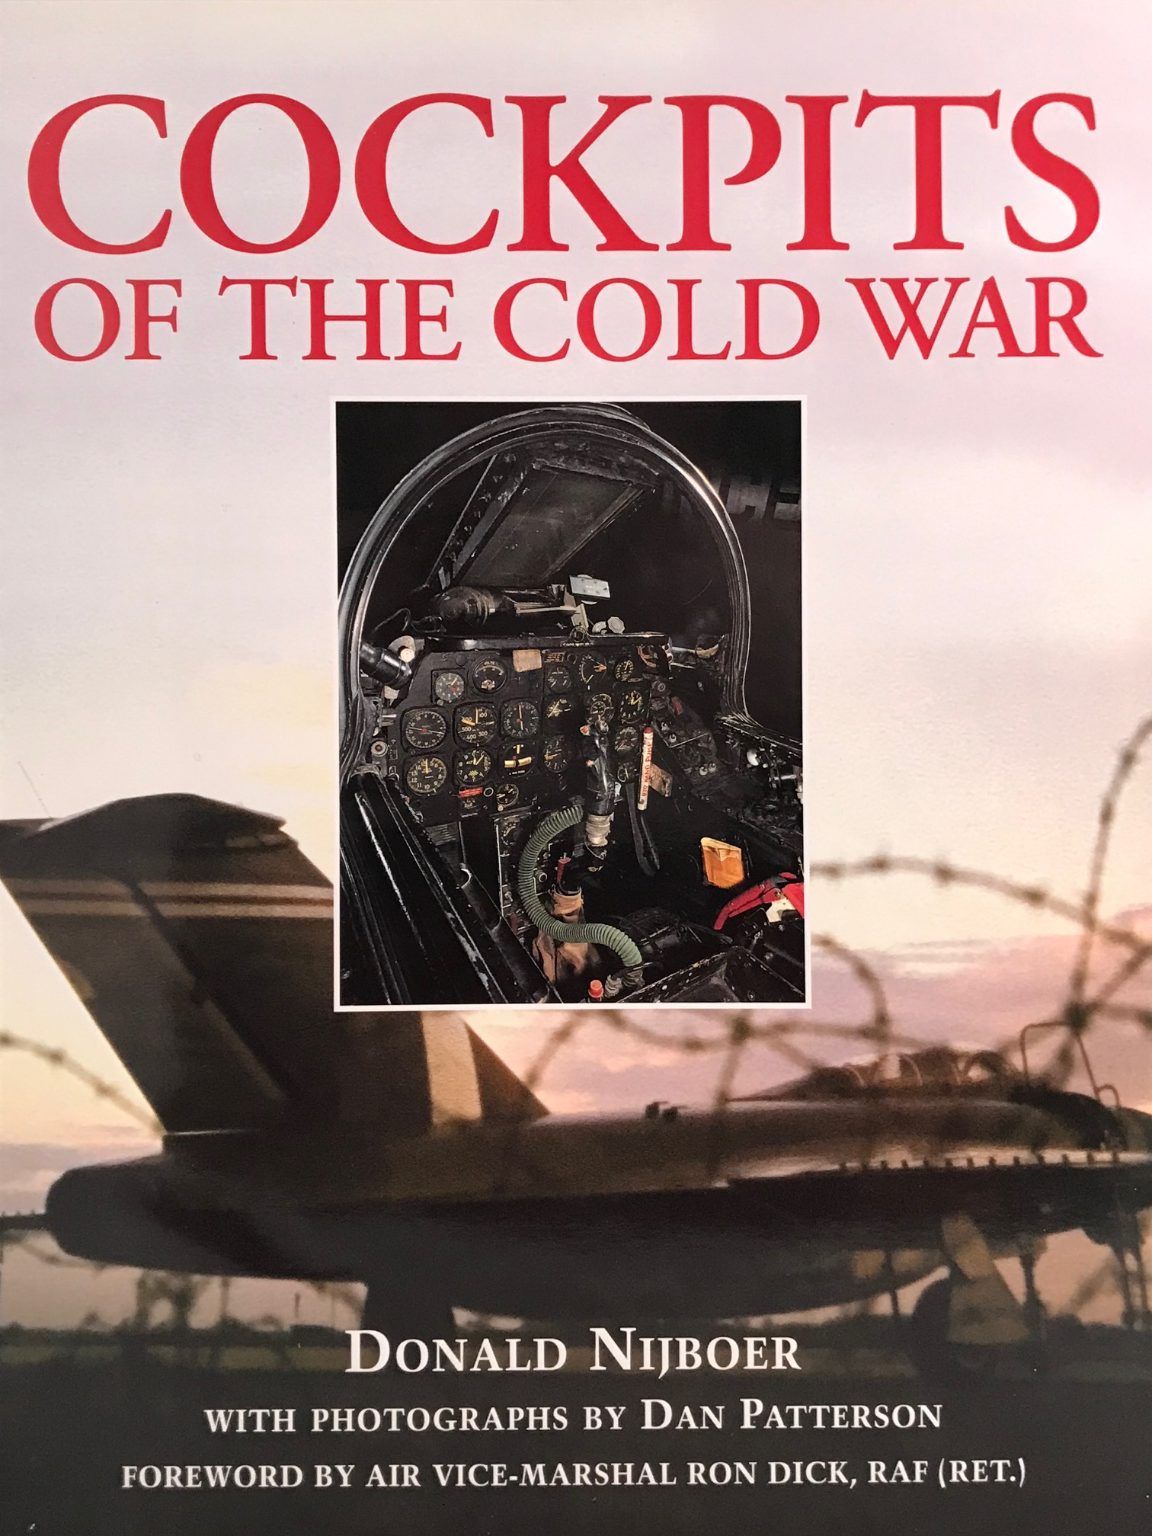 COCKPITS OF THE COLD WAR